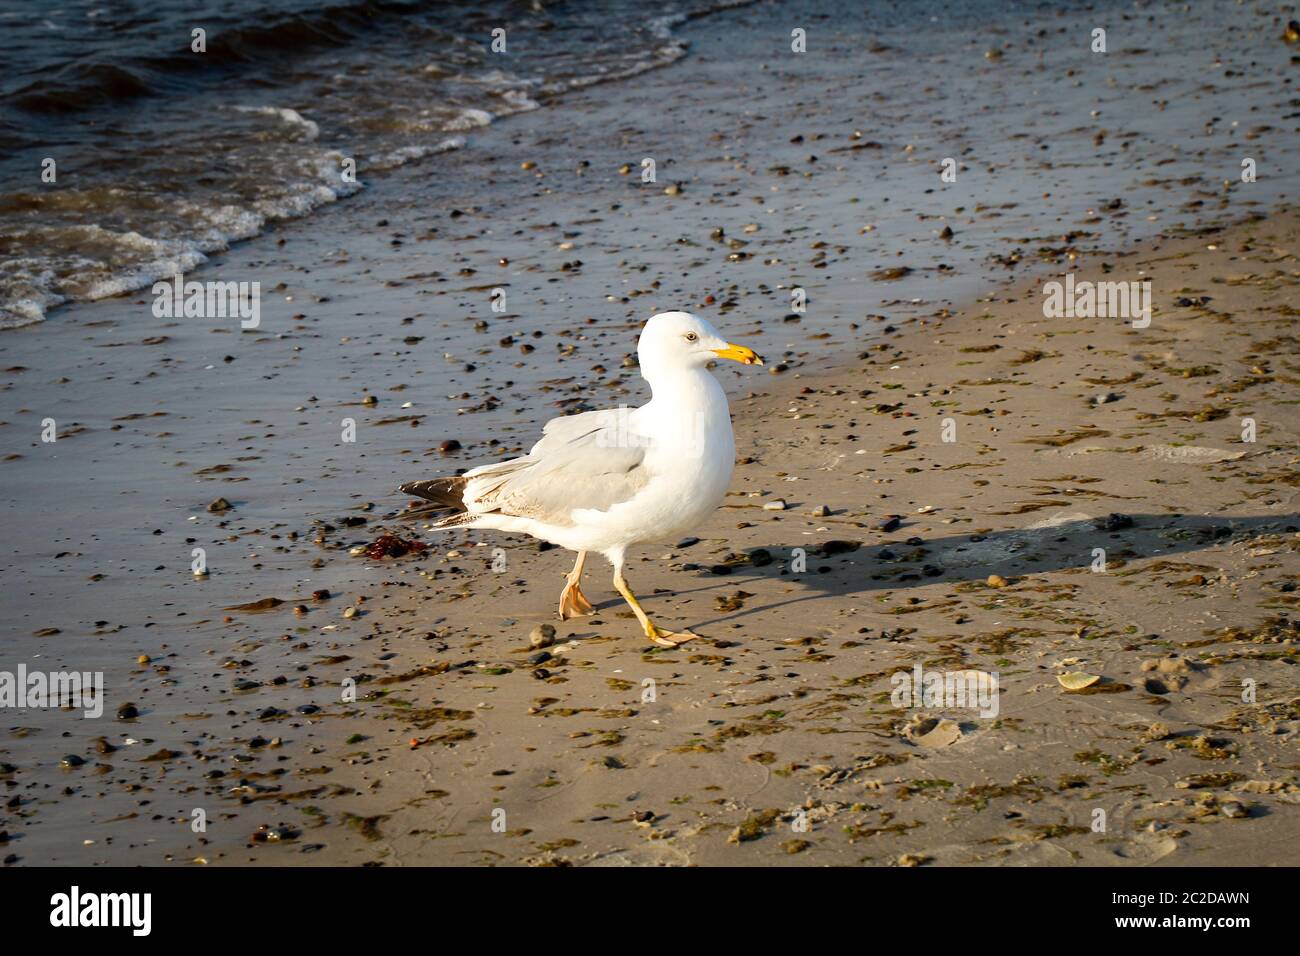 A seagull on the beach at the baltic sea. The birds gull the sea. Stock Photo